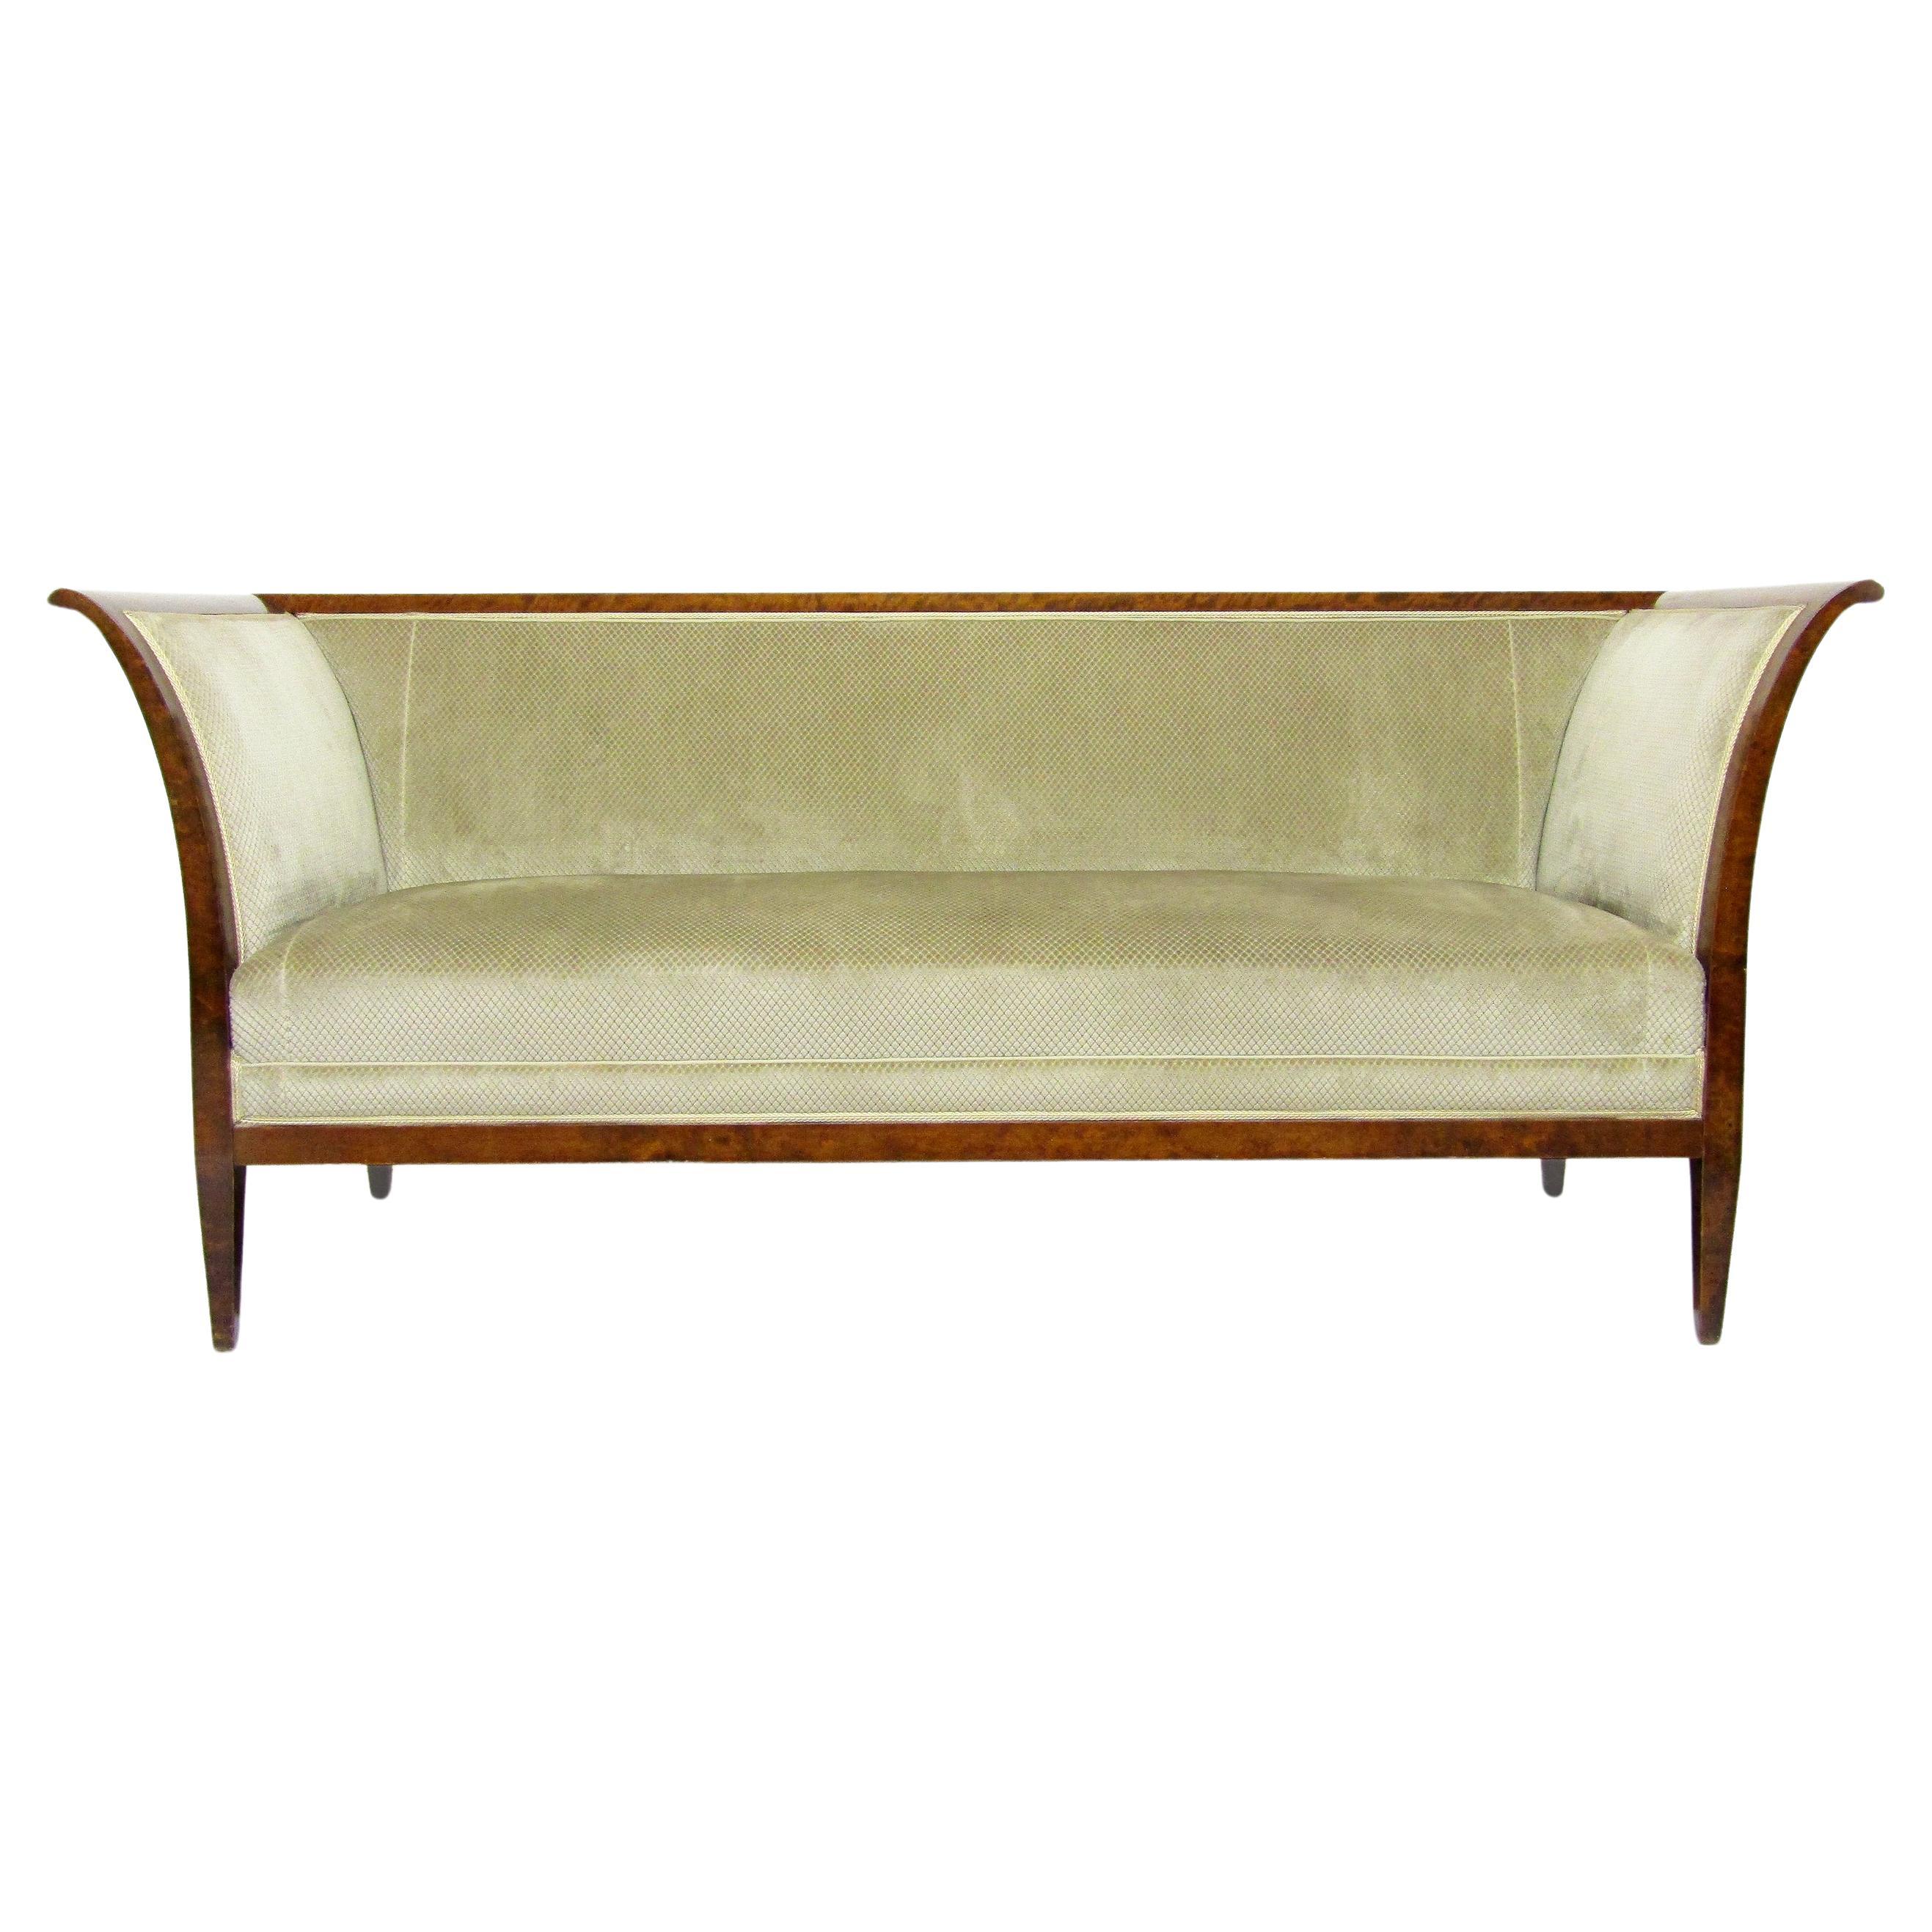 1930s Danish Art Deco 3-Seater Sofa In Cuban Mahogany By Frits Henningsen For Sale